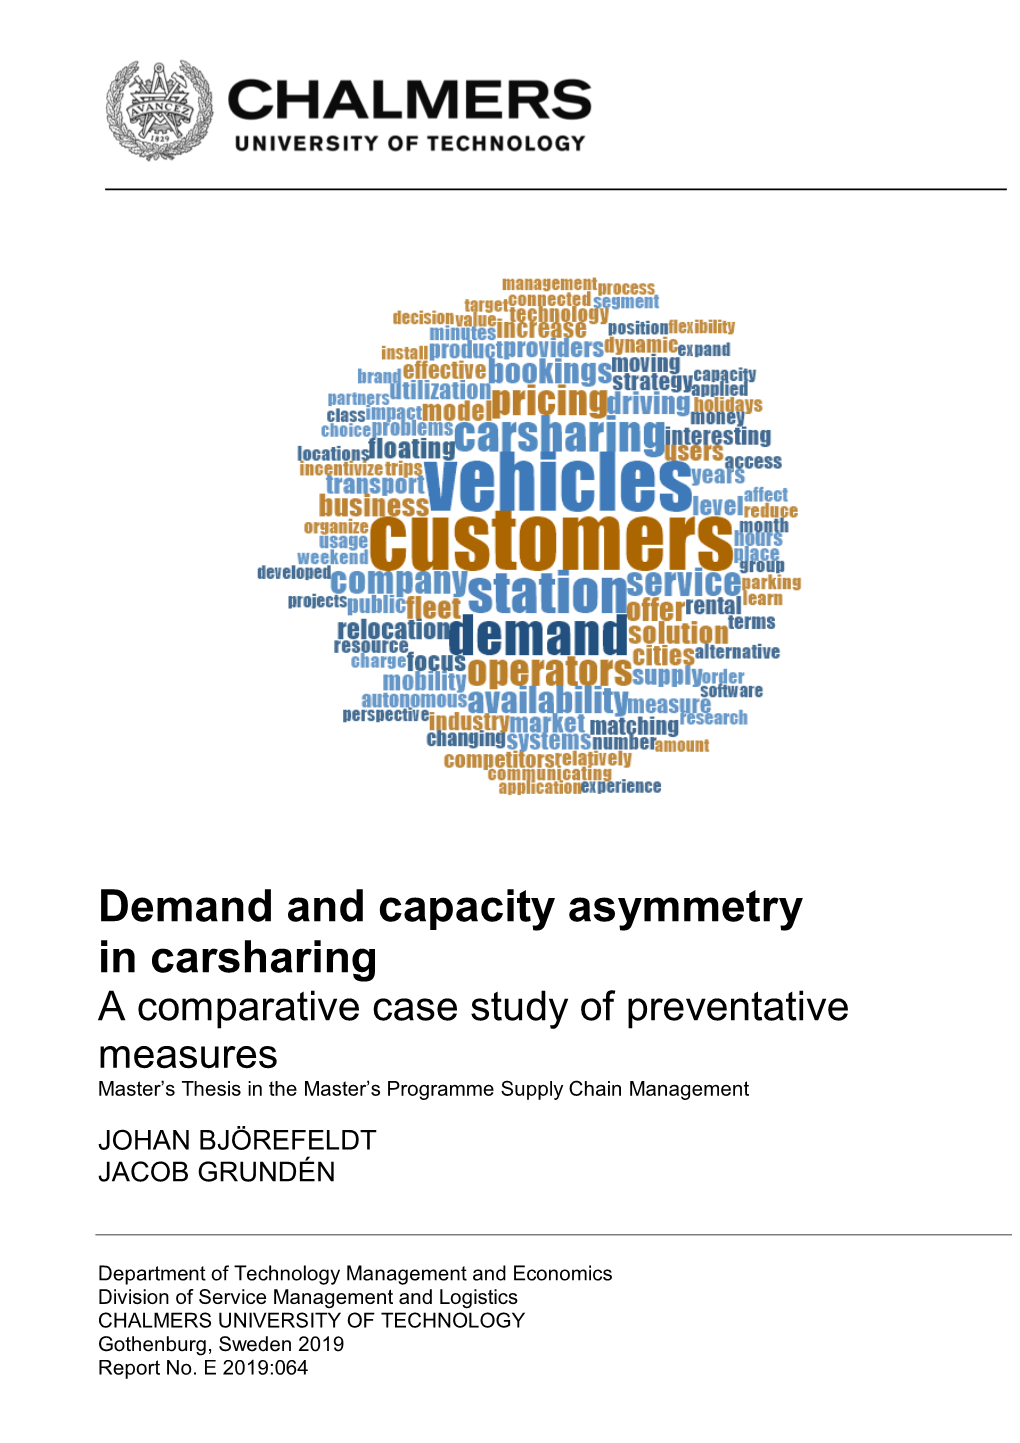 Demand and Capacity Asymmetry in Carsharing a Comparative Case Study of Preventative Measures Master’S Thesis in the Master’S Programme Supply Chain Management